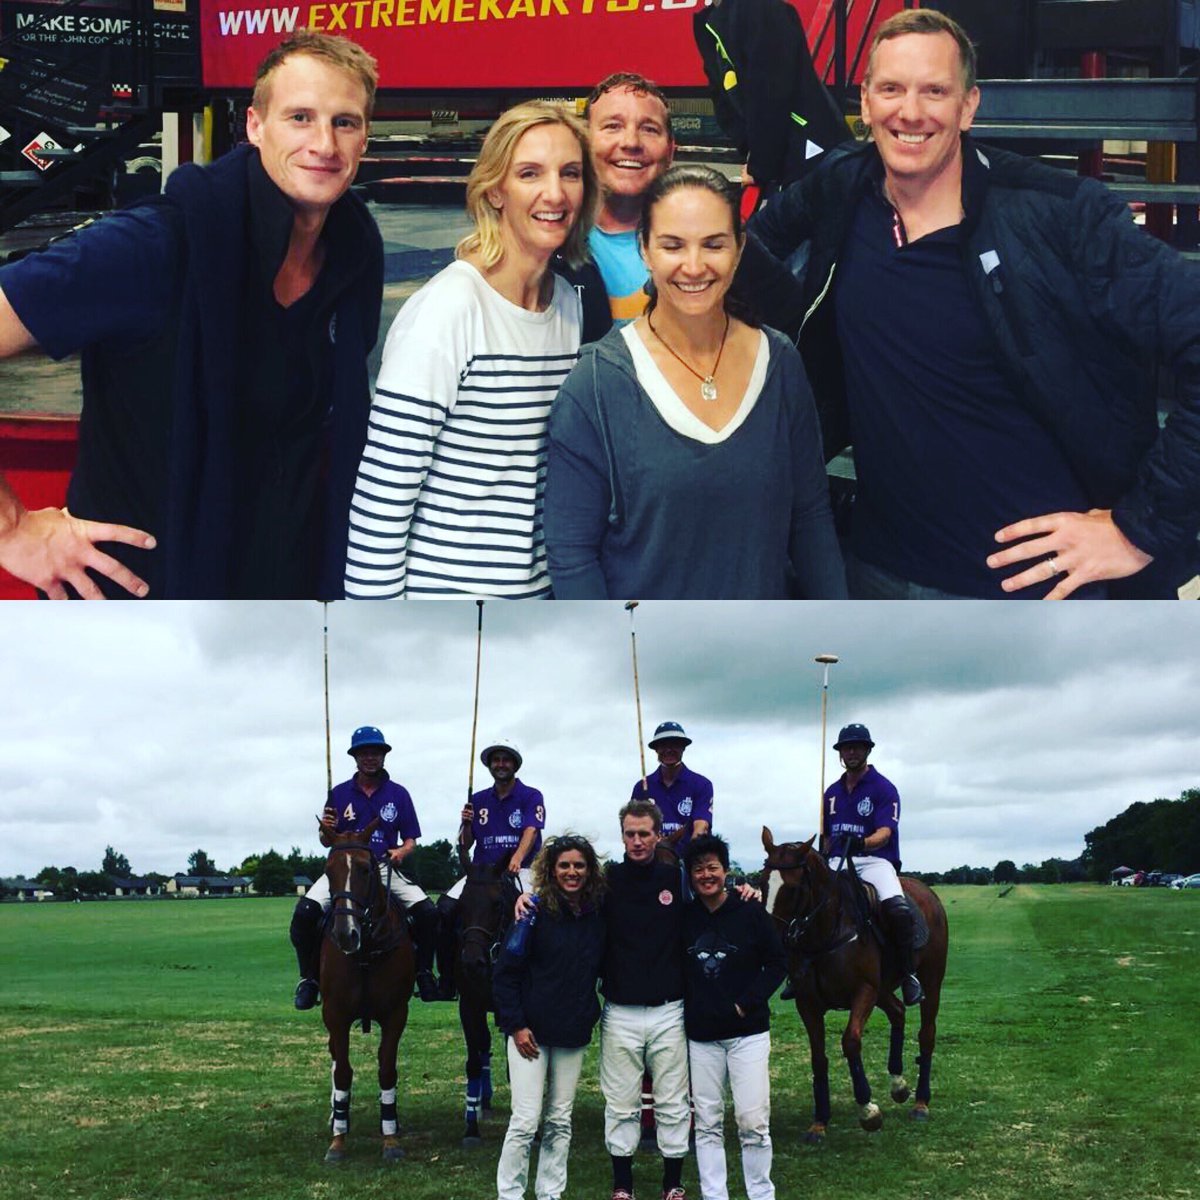 #TBT to our polo holiday pros!! #ainsleypolo #poloplayers #poloholidays #missyouguys #comeseeussoon #friendswhoplaytogetherstaytogether